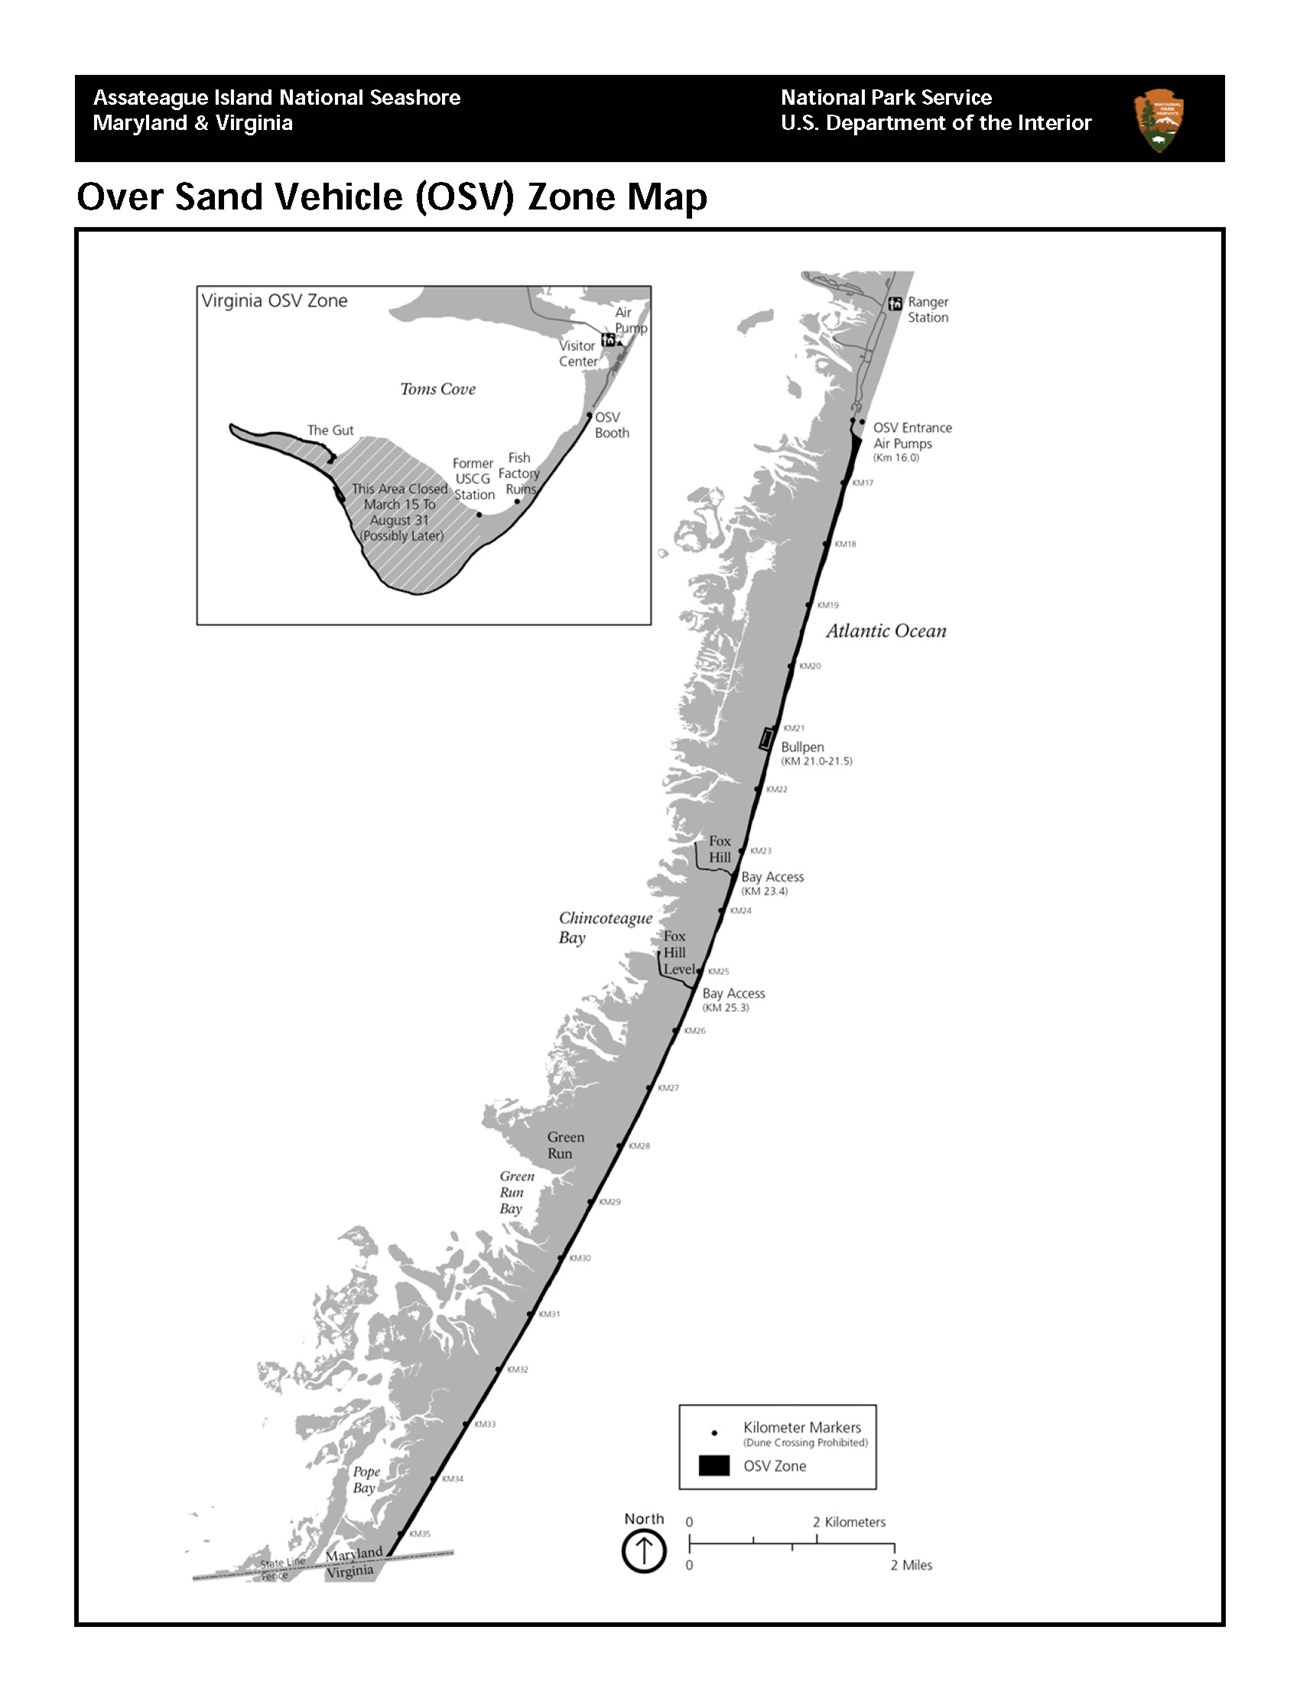 Map showing Over Sand Vehicle Zones (OSV) in Maryland and Virginia